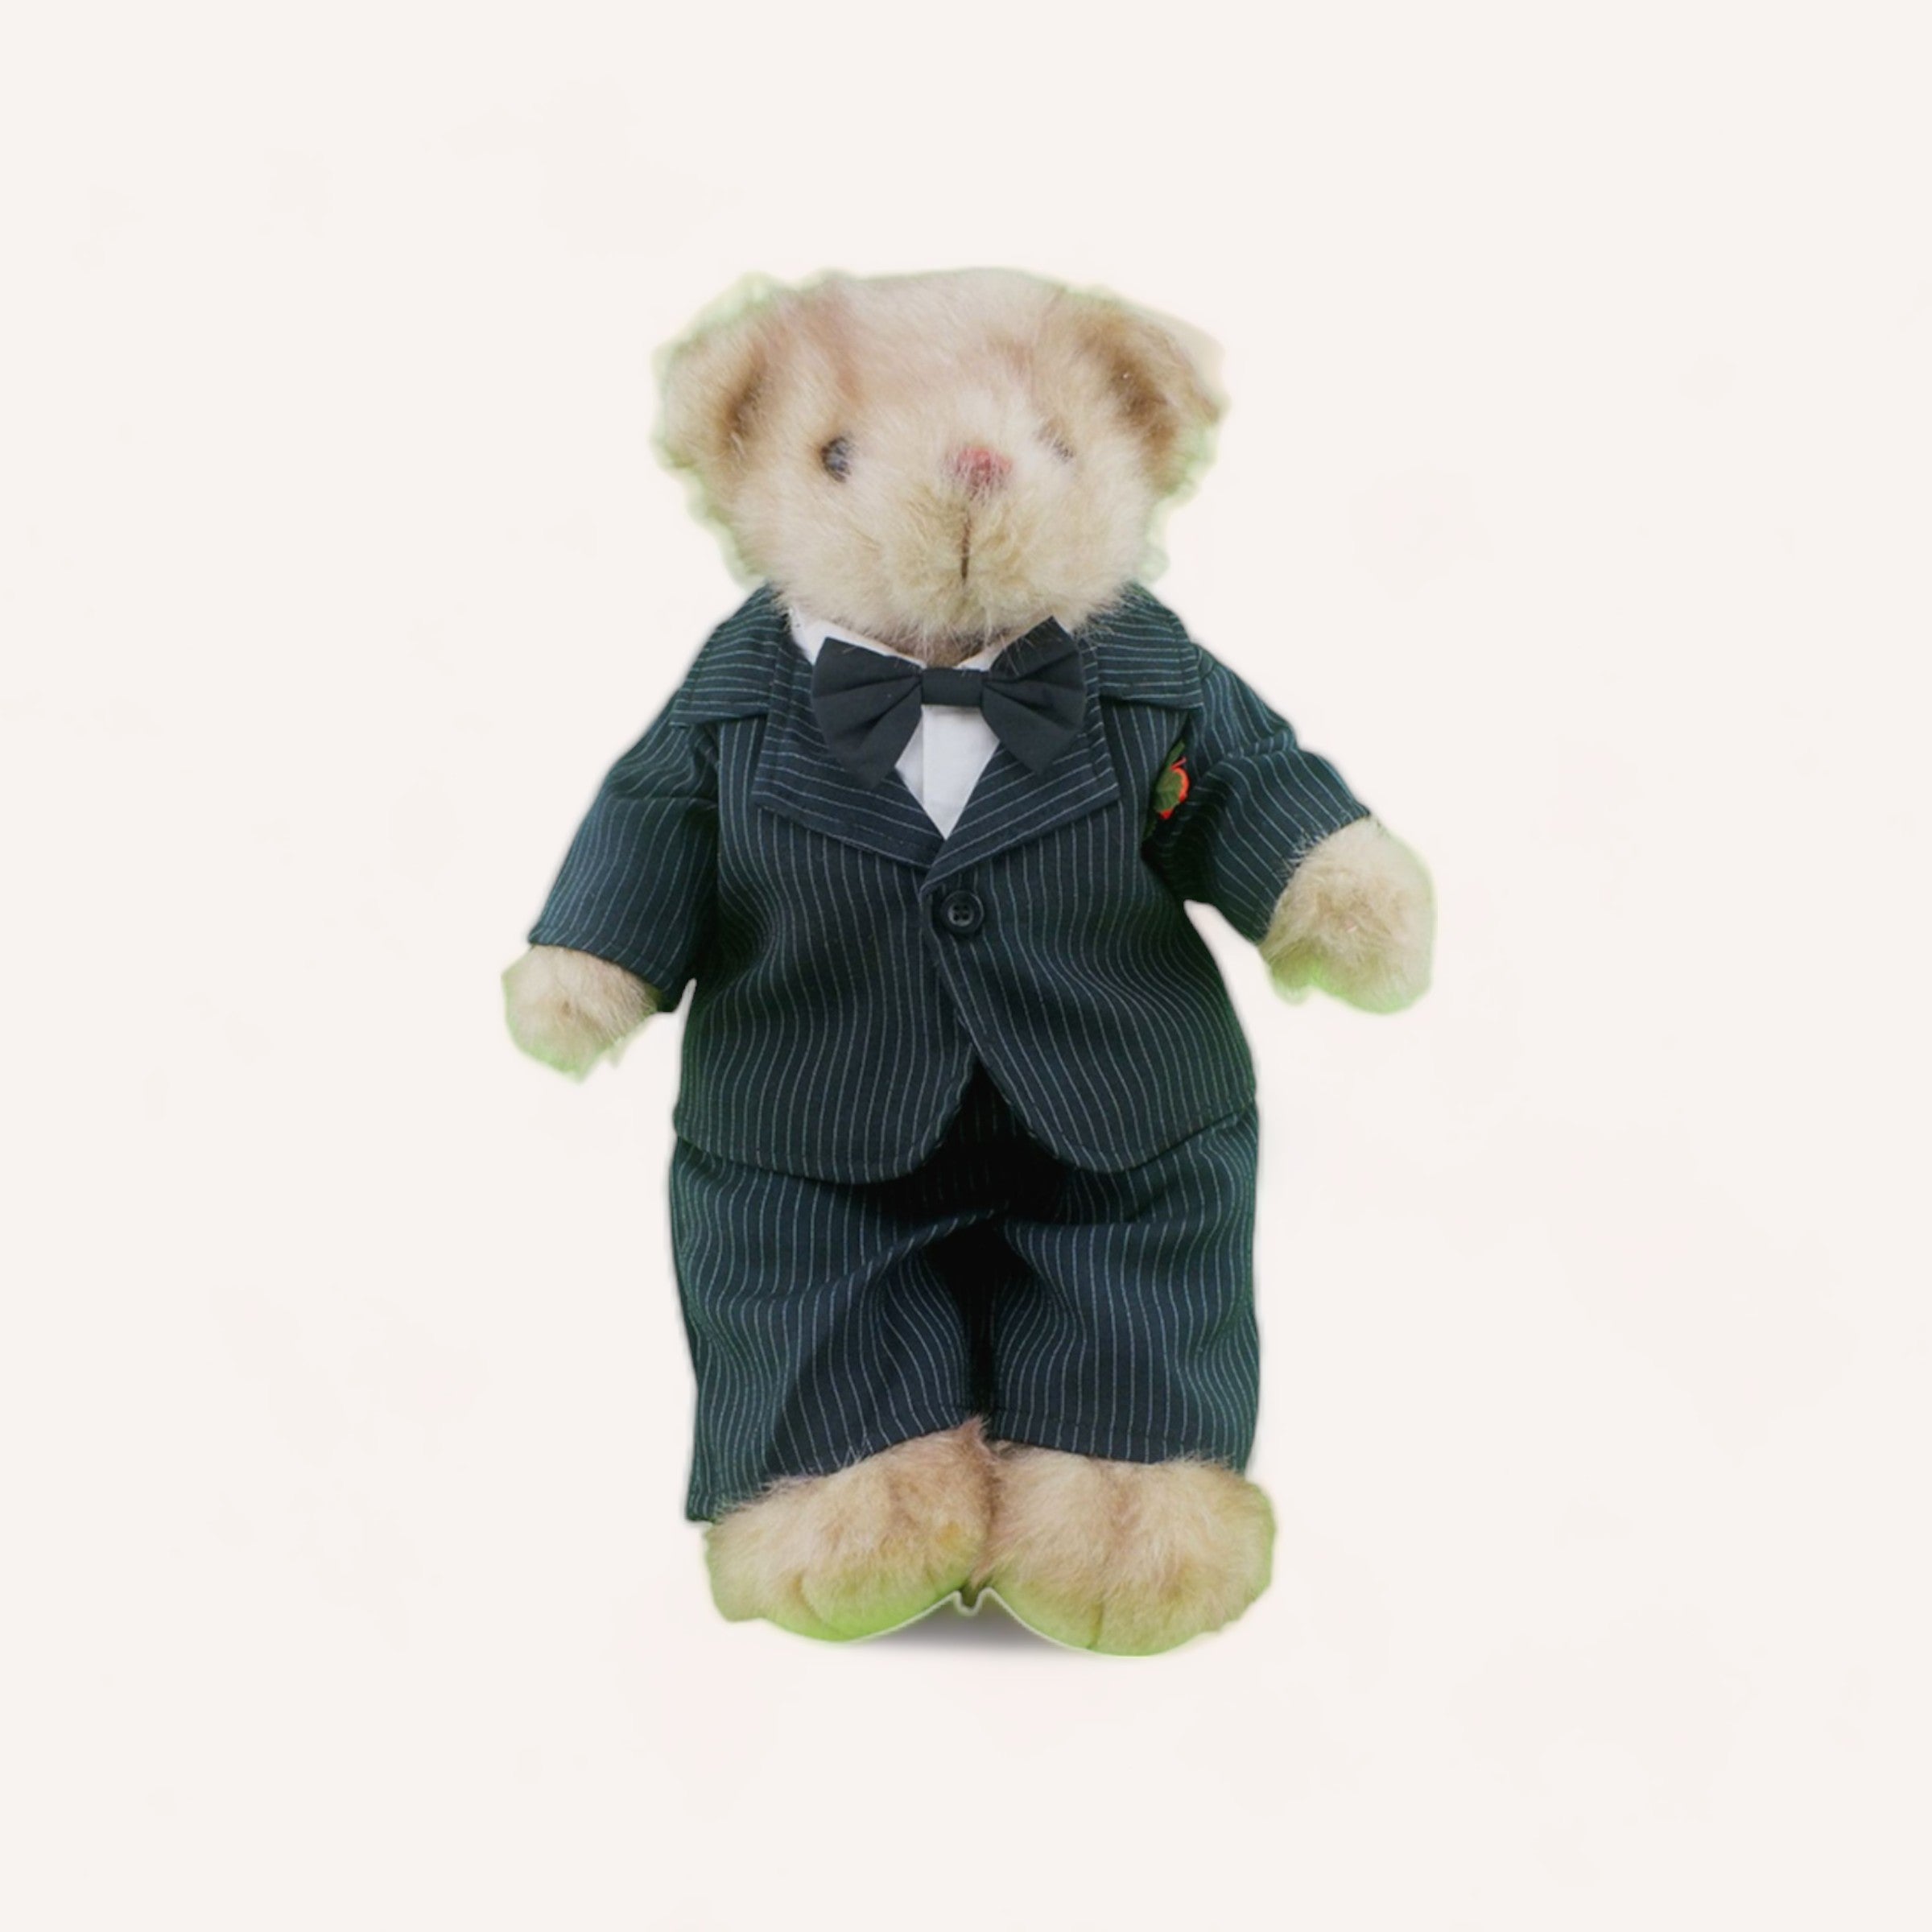 An elegant Bear Wedding Groom Outfit dressed in a 4 piece suit with a bow tie, ready for a formal event by The Teddy Factory.